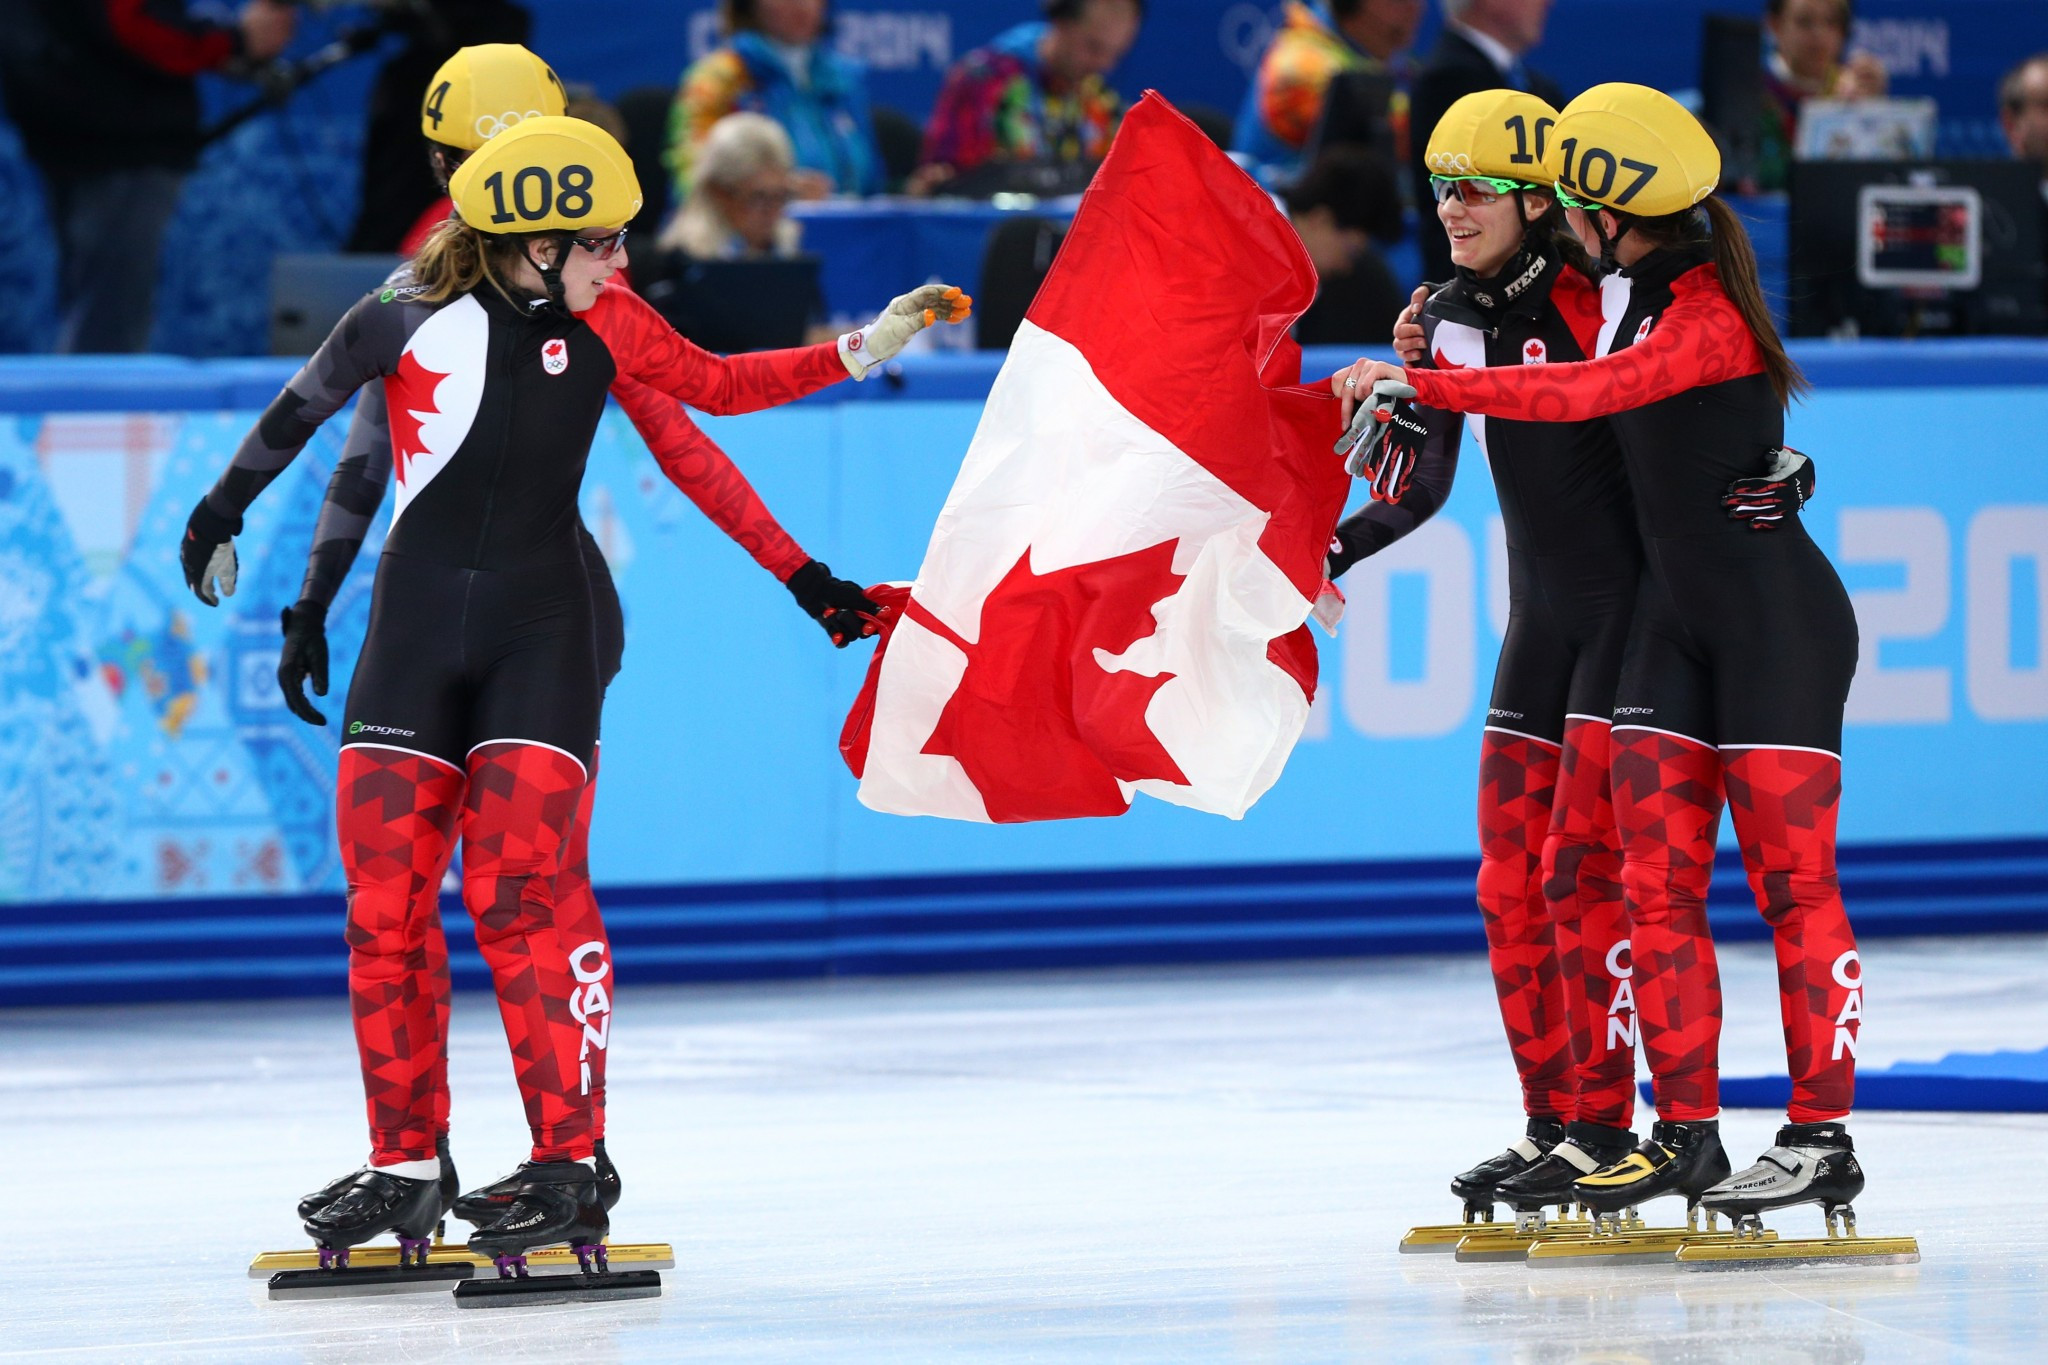 Canadian speed skating competitors have been selected for Pyeongchang 2018  ©Getty Images